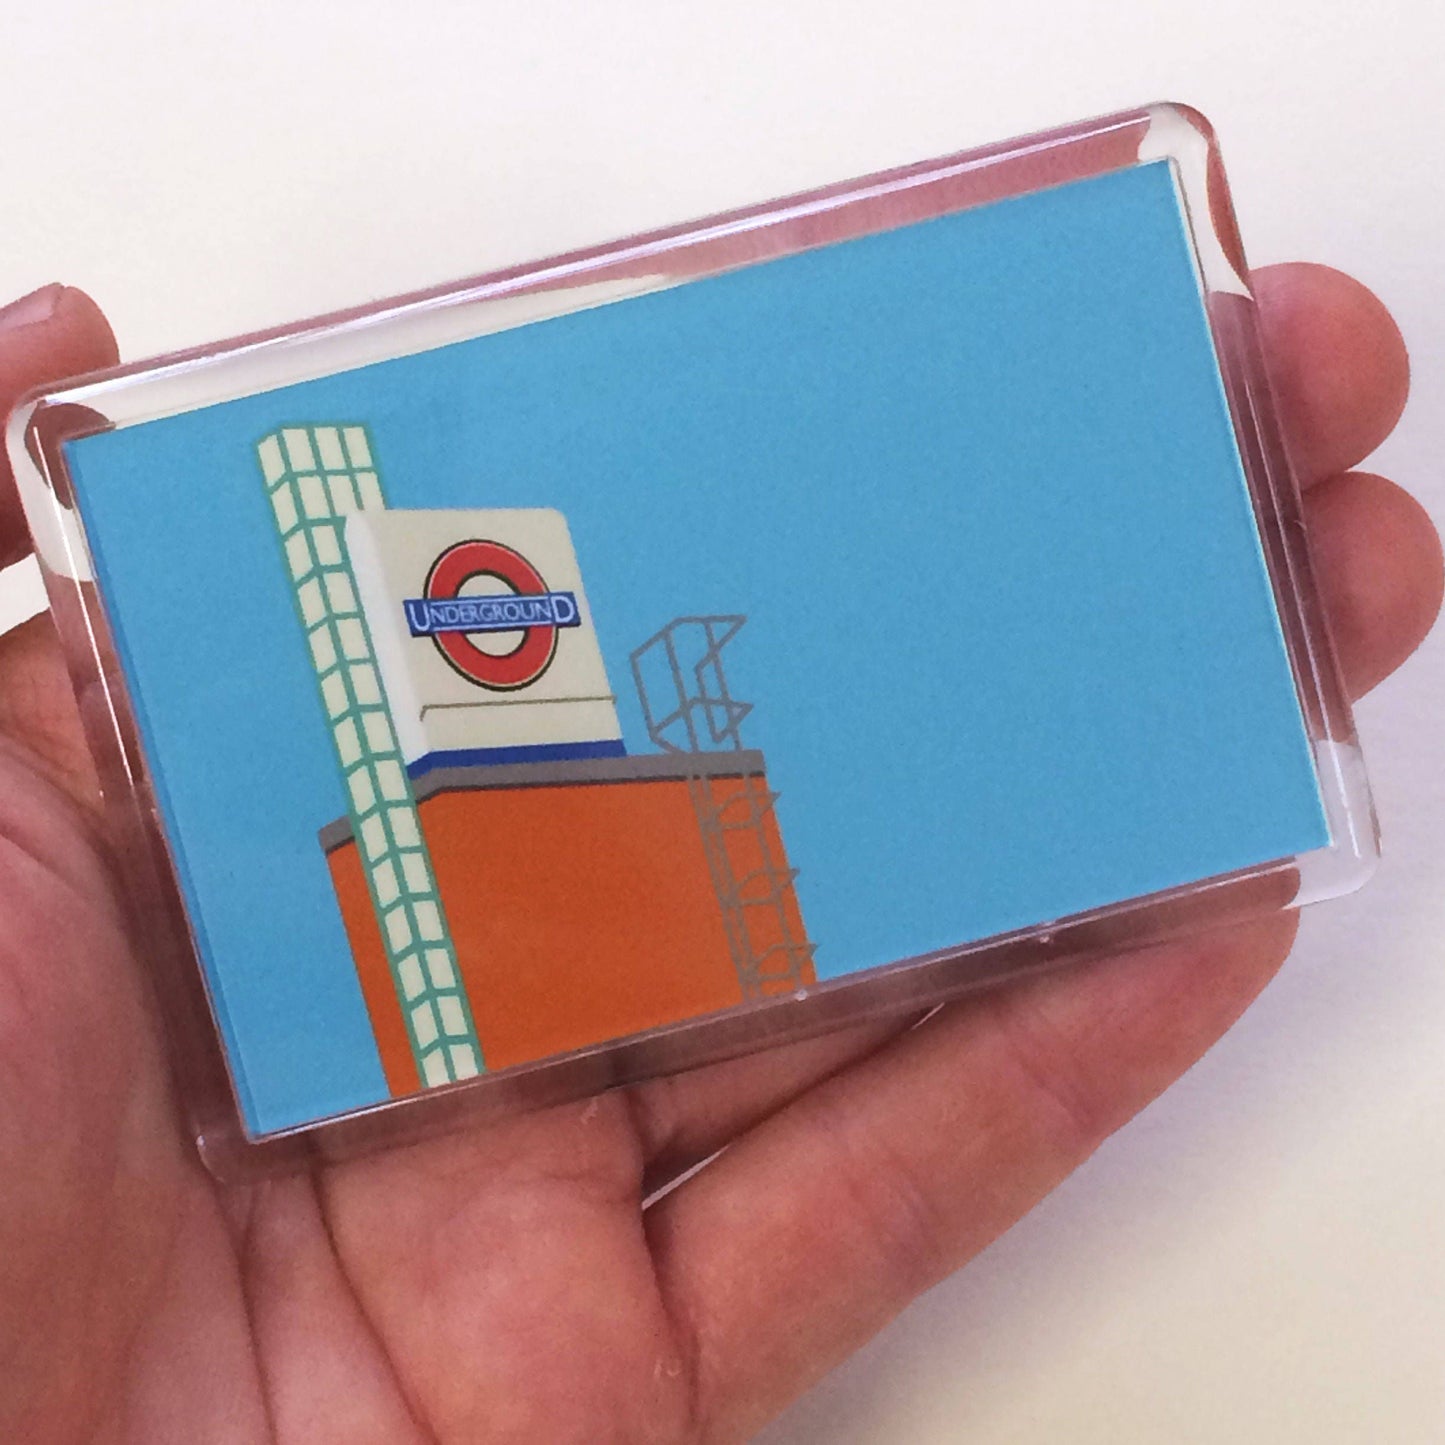 LONDON Underground Fridge magnet from the 'Art Deco Tube Stations' Collection by Rebecca Pymar